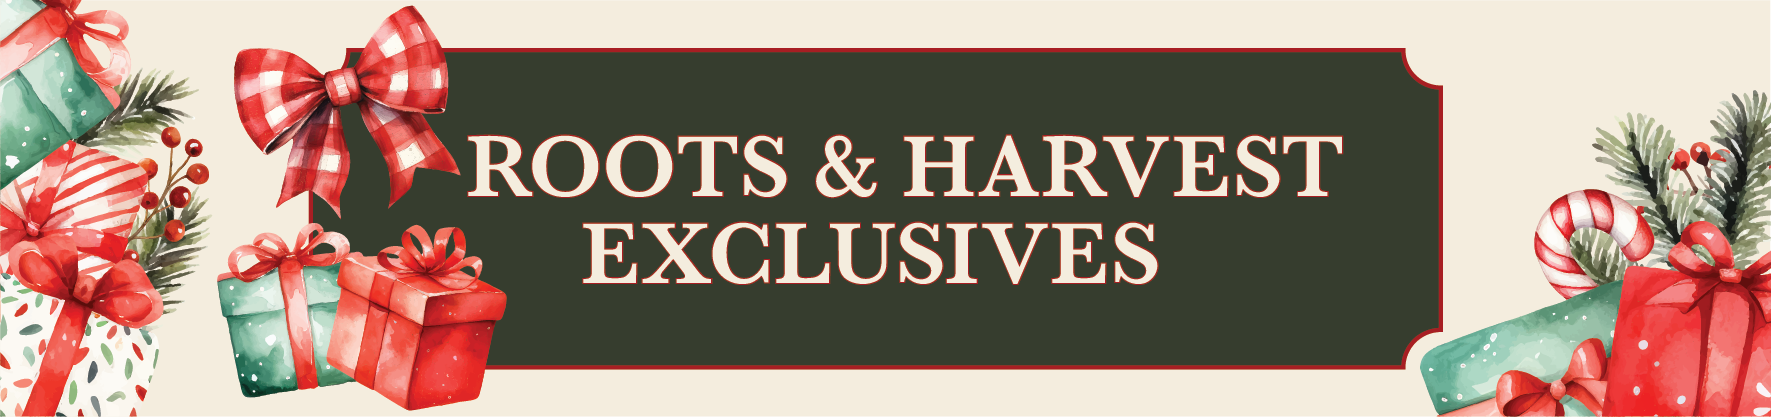 Roots & Harvest Exclusives